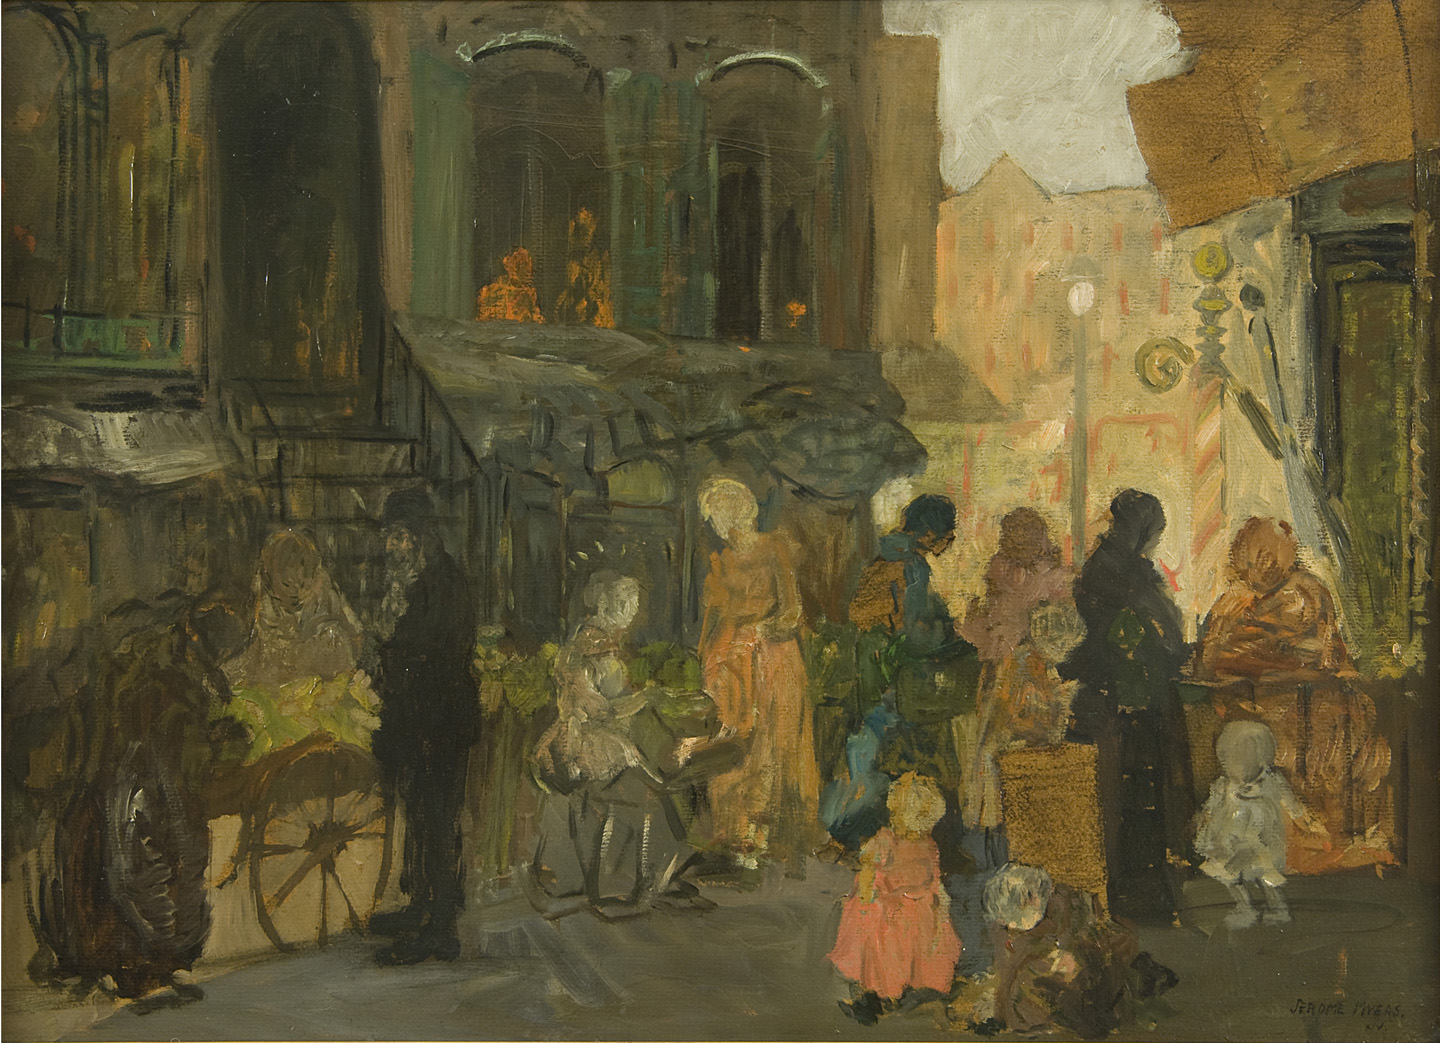 Painting of figures in the street (no visible faces) buying goods outside of a building